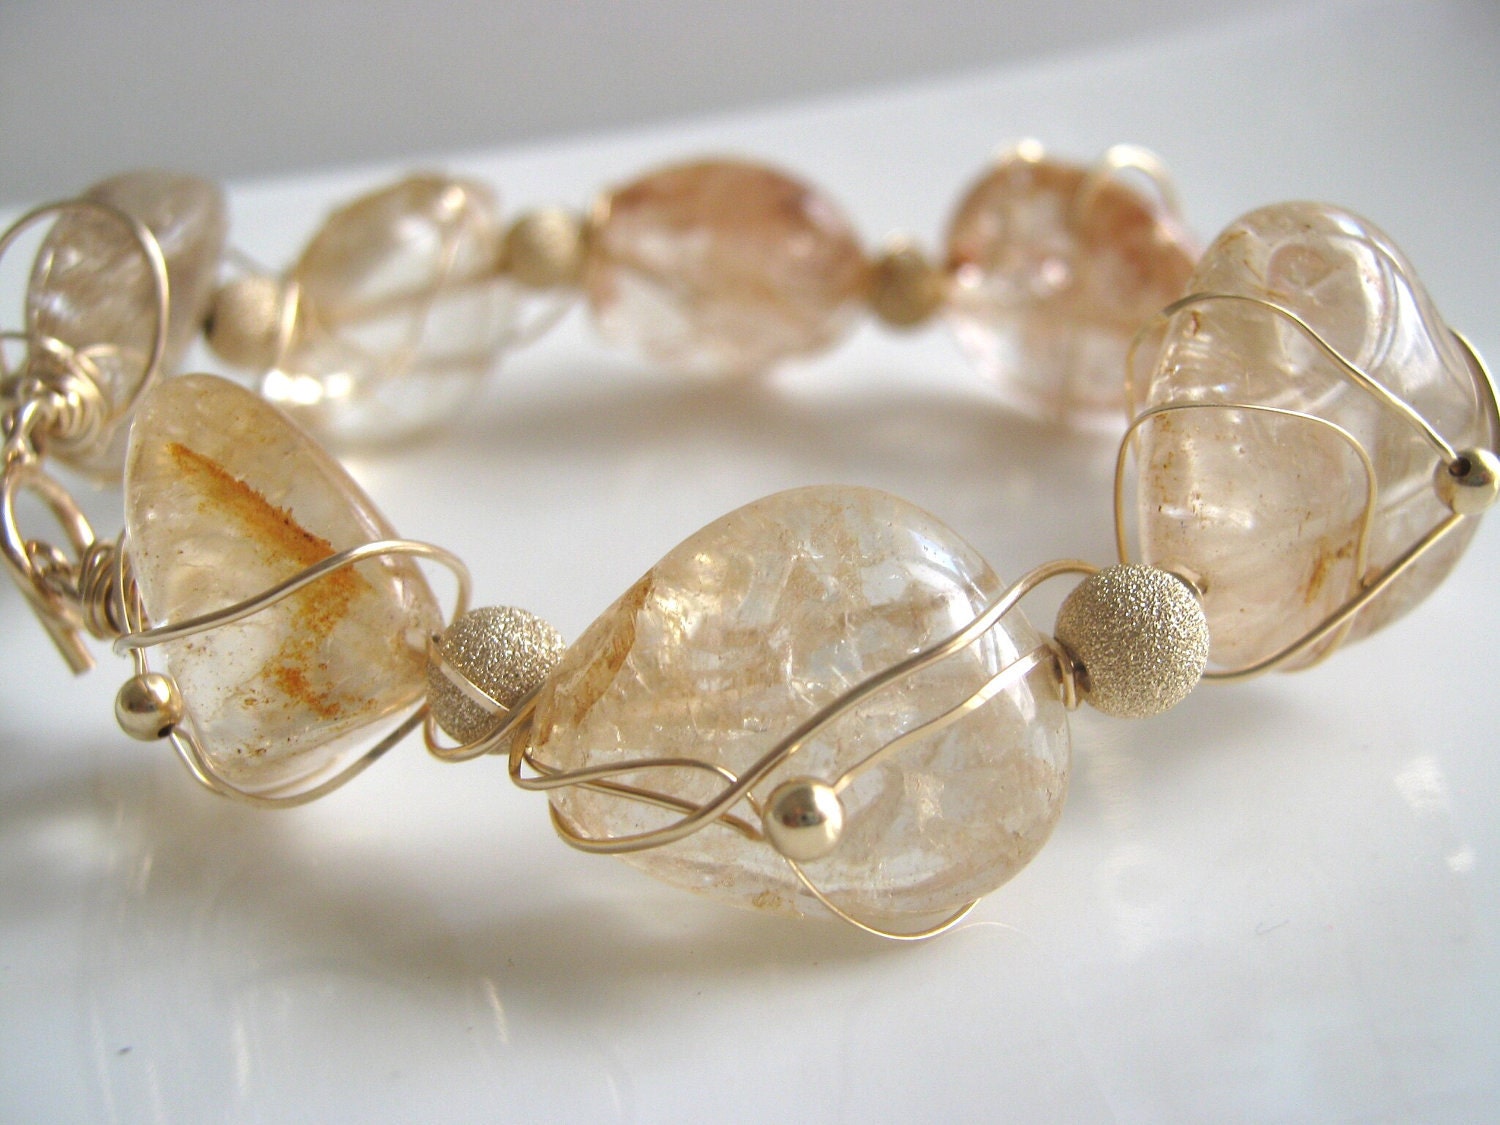 Gold Filled Bracelet - Gold Inflections - magnificent ice flake quartz bracelet in gold filled - free shipping worldwide